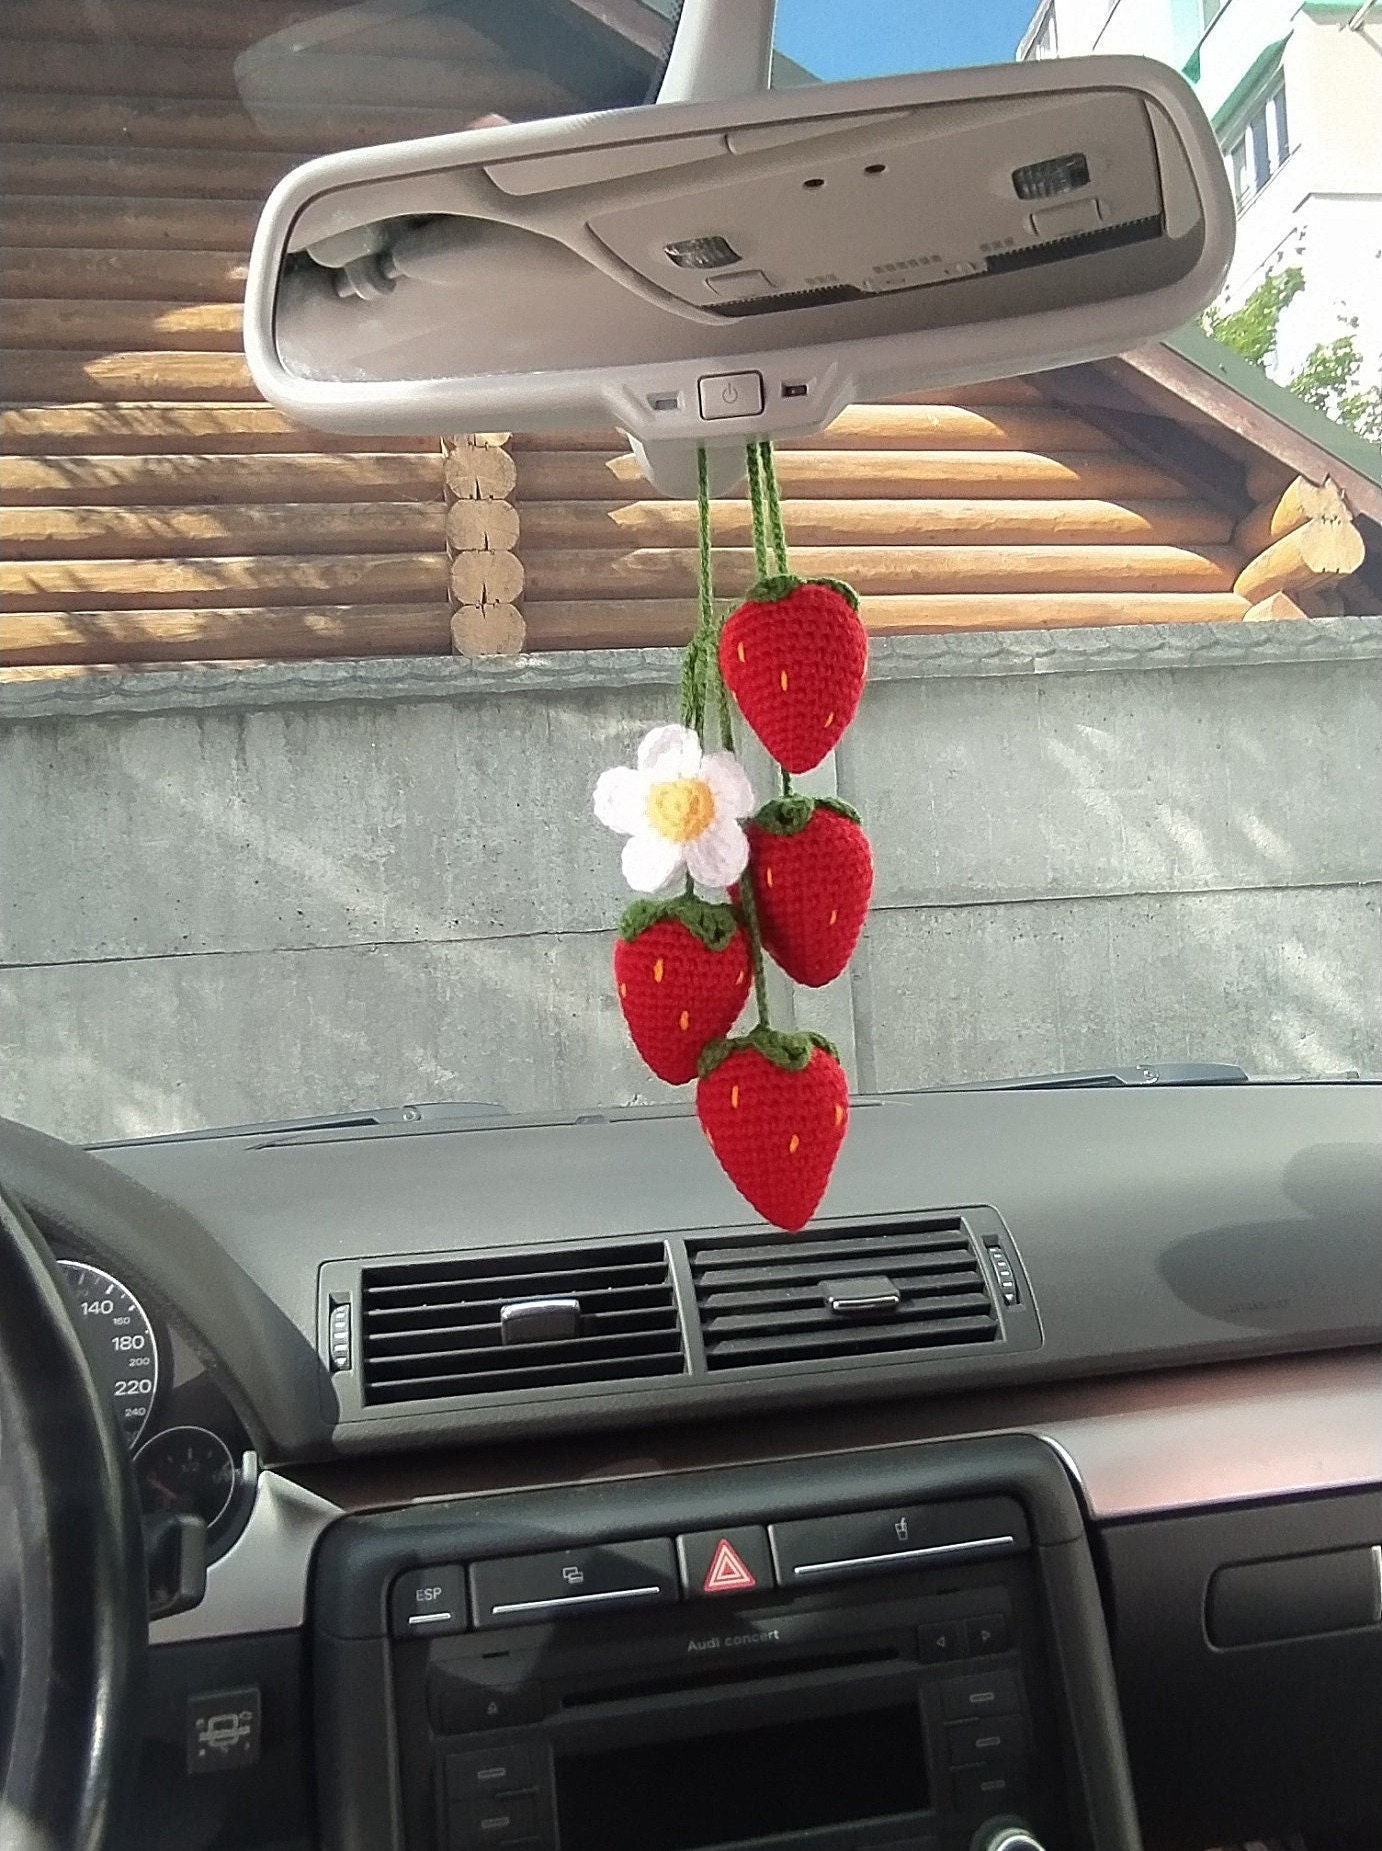 TIESOME 2 Pcs Car Mirror Charms, Cute Strawberry Car Hanging Ornament for Car  Rearview Mirror Decor Crochet Car Mirror Hanging Charms Accessories Flower  Hand Knitted Strawberry Car Decor for Women : 